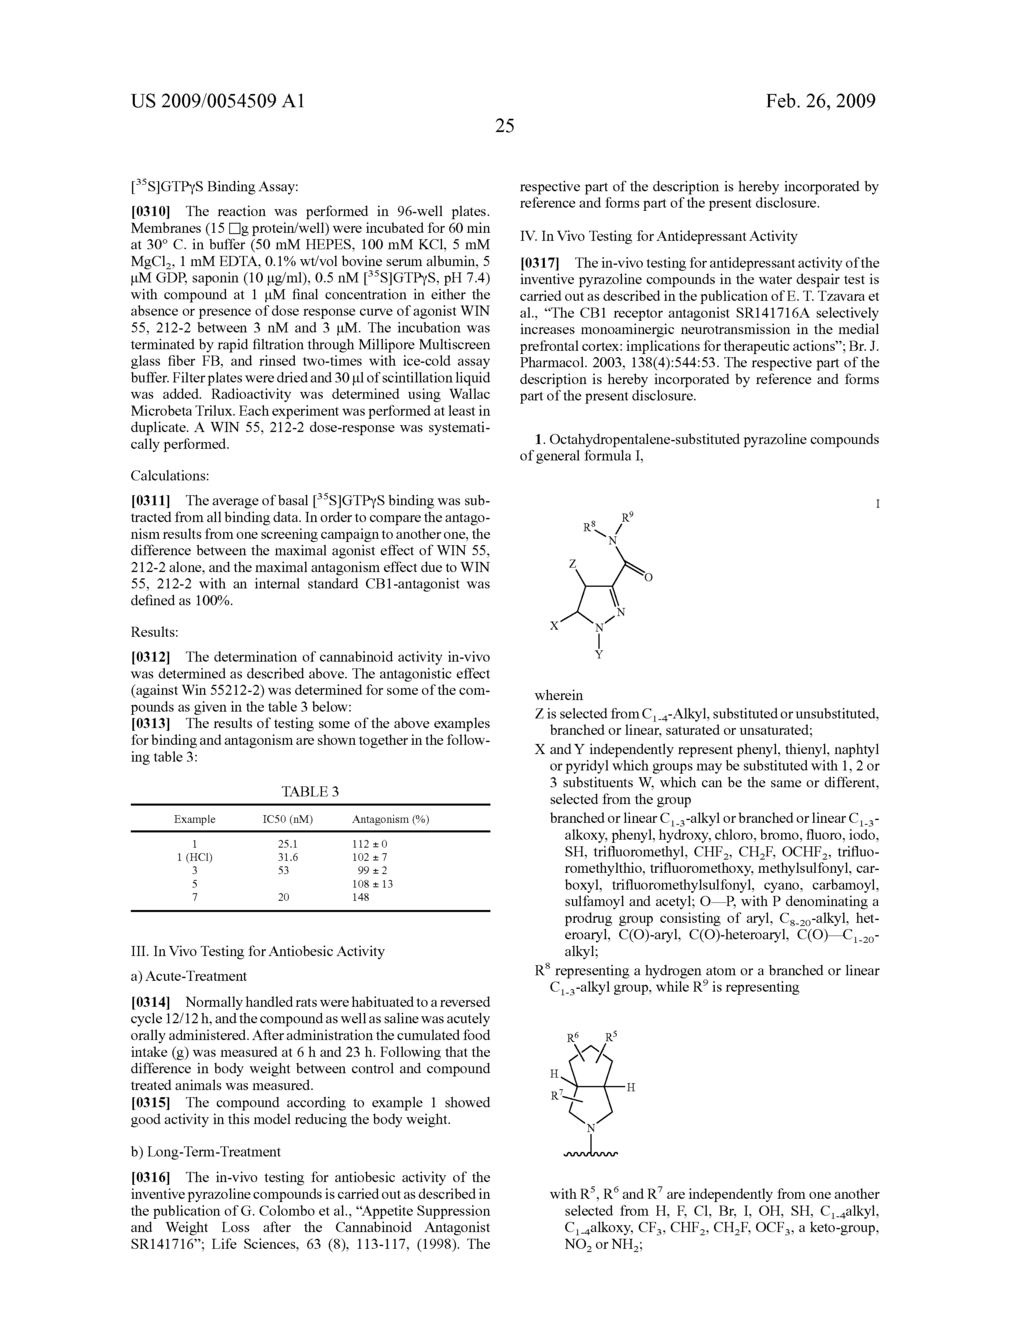 Octahydropentalene-Substituted Pyrazoline Derivatives, Their Prepartion and Use as Medicaments - diagram, schematic, and image 26